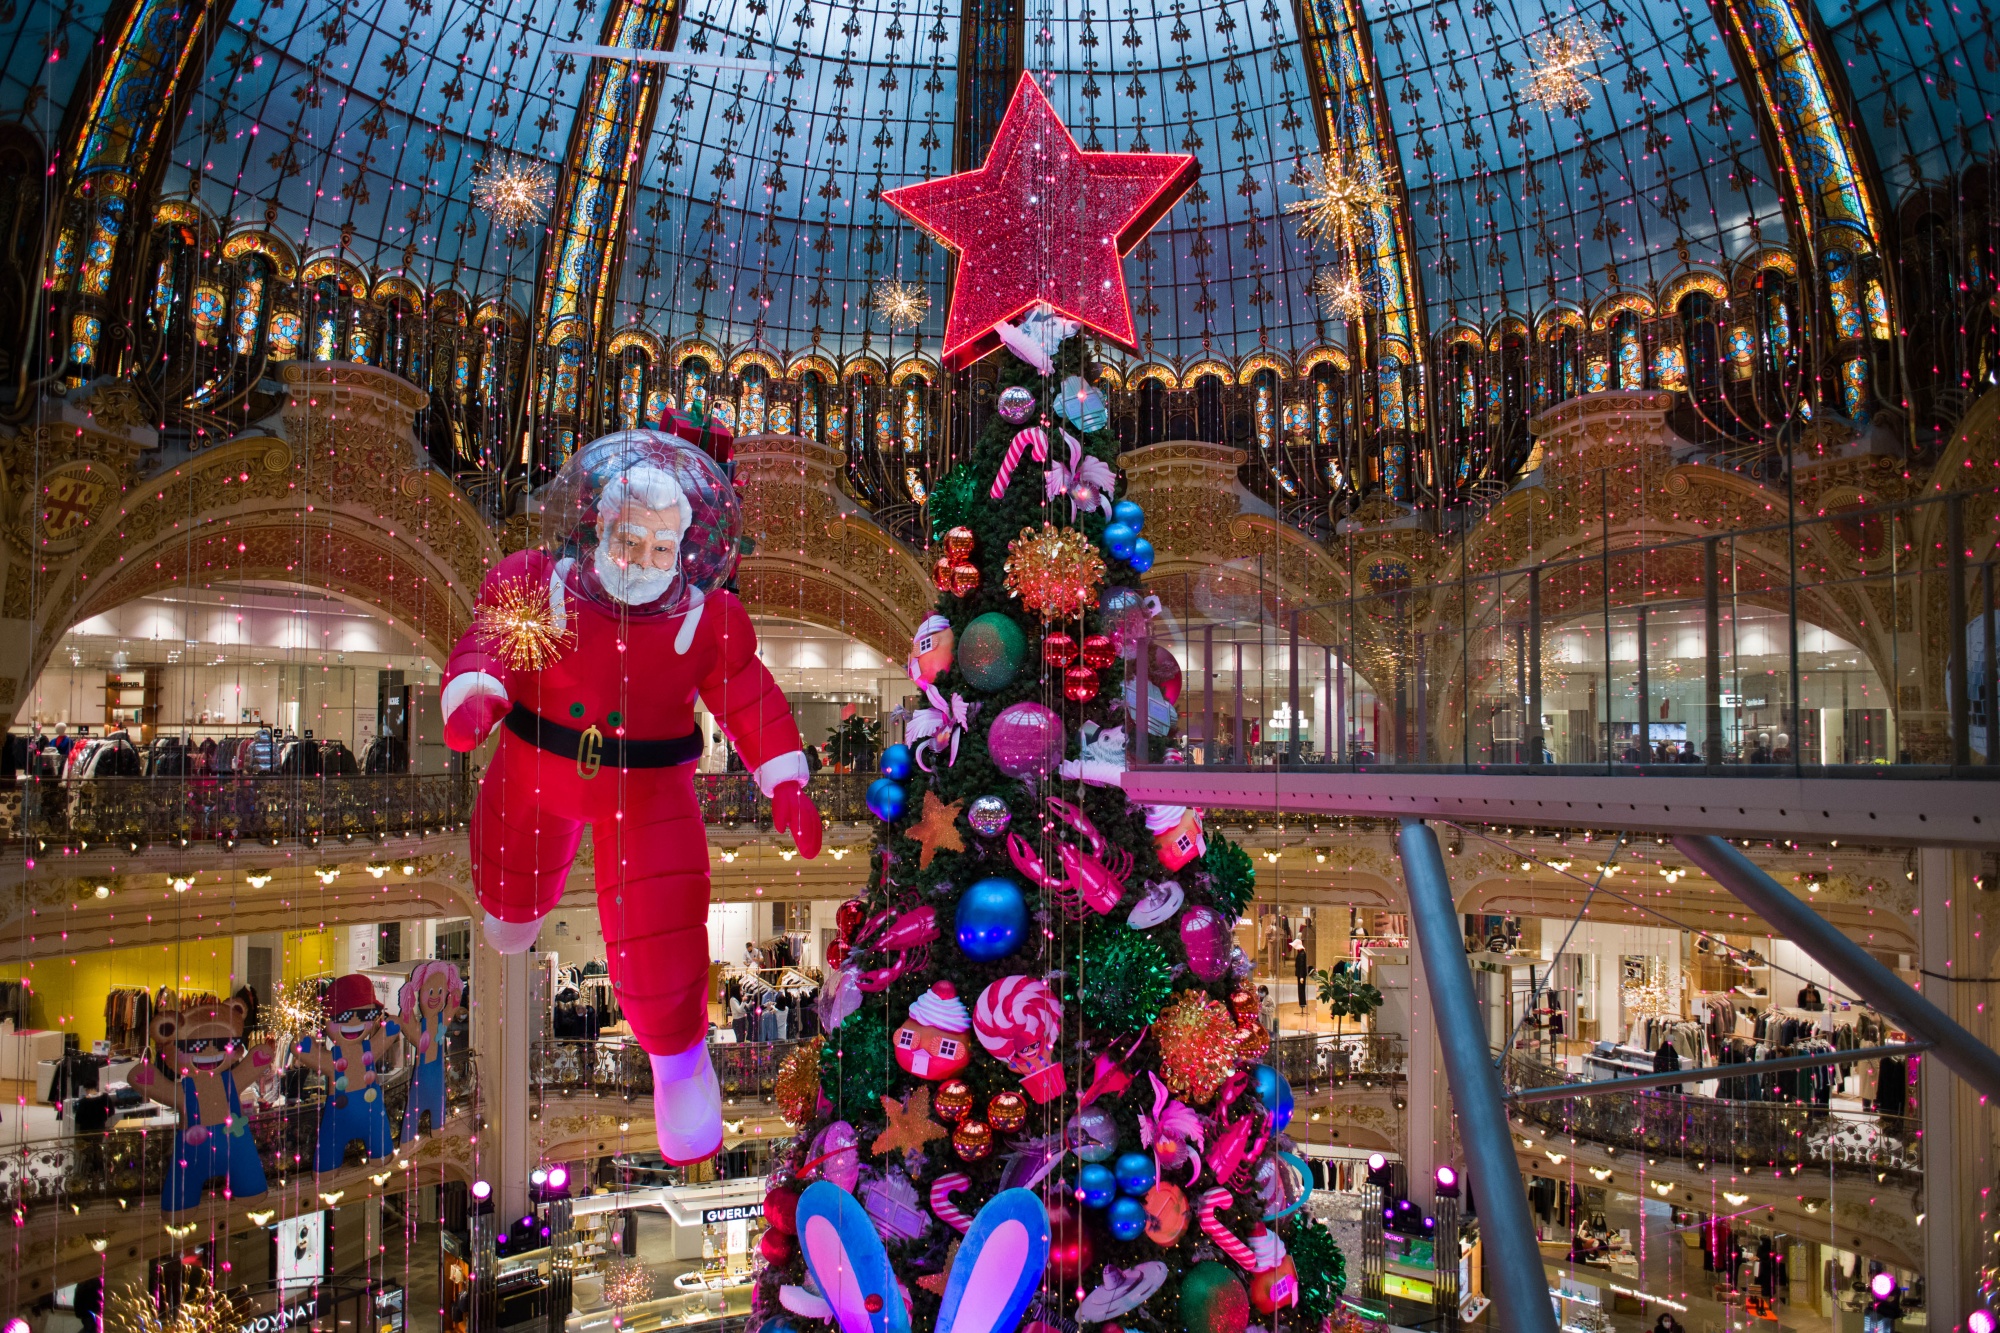 The Galeries Lafayette group reviews the impact of its strategy to